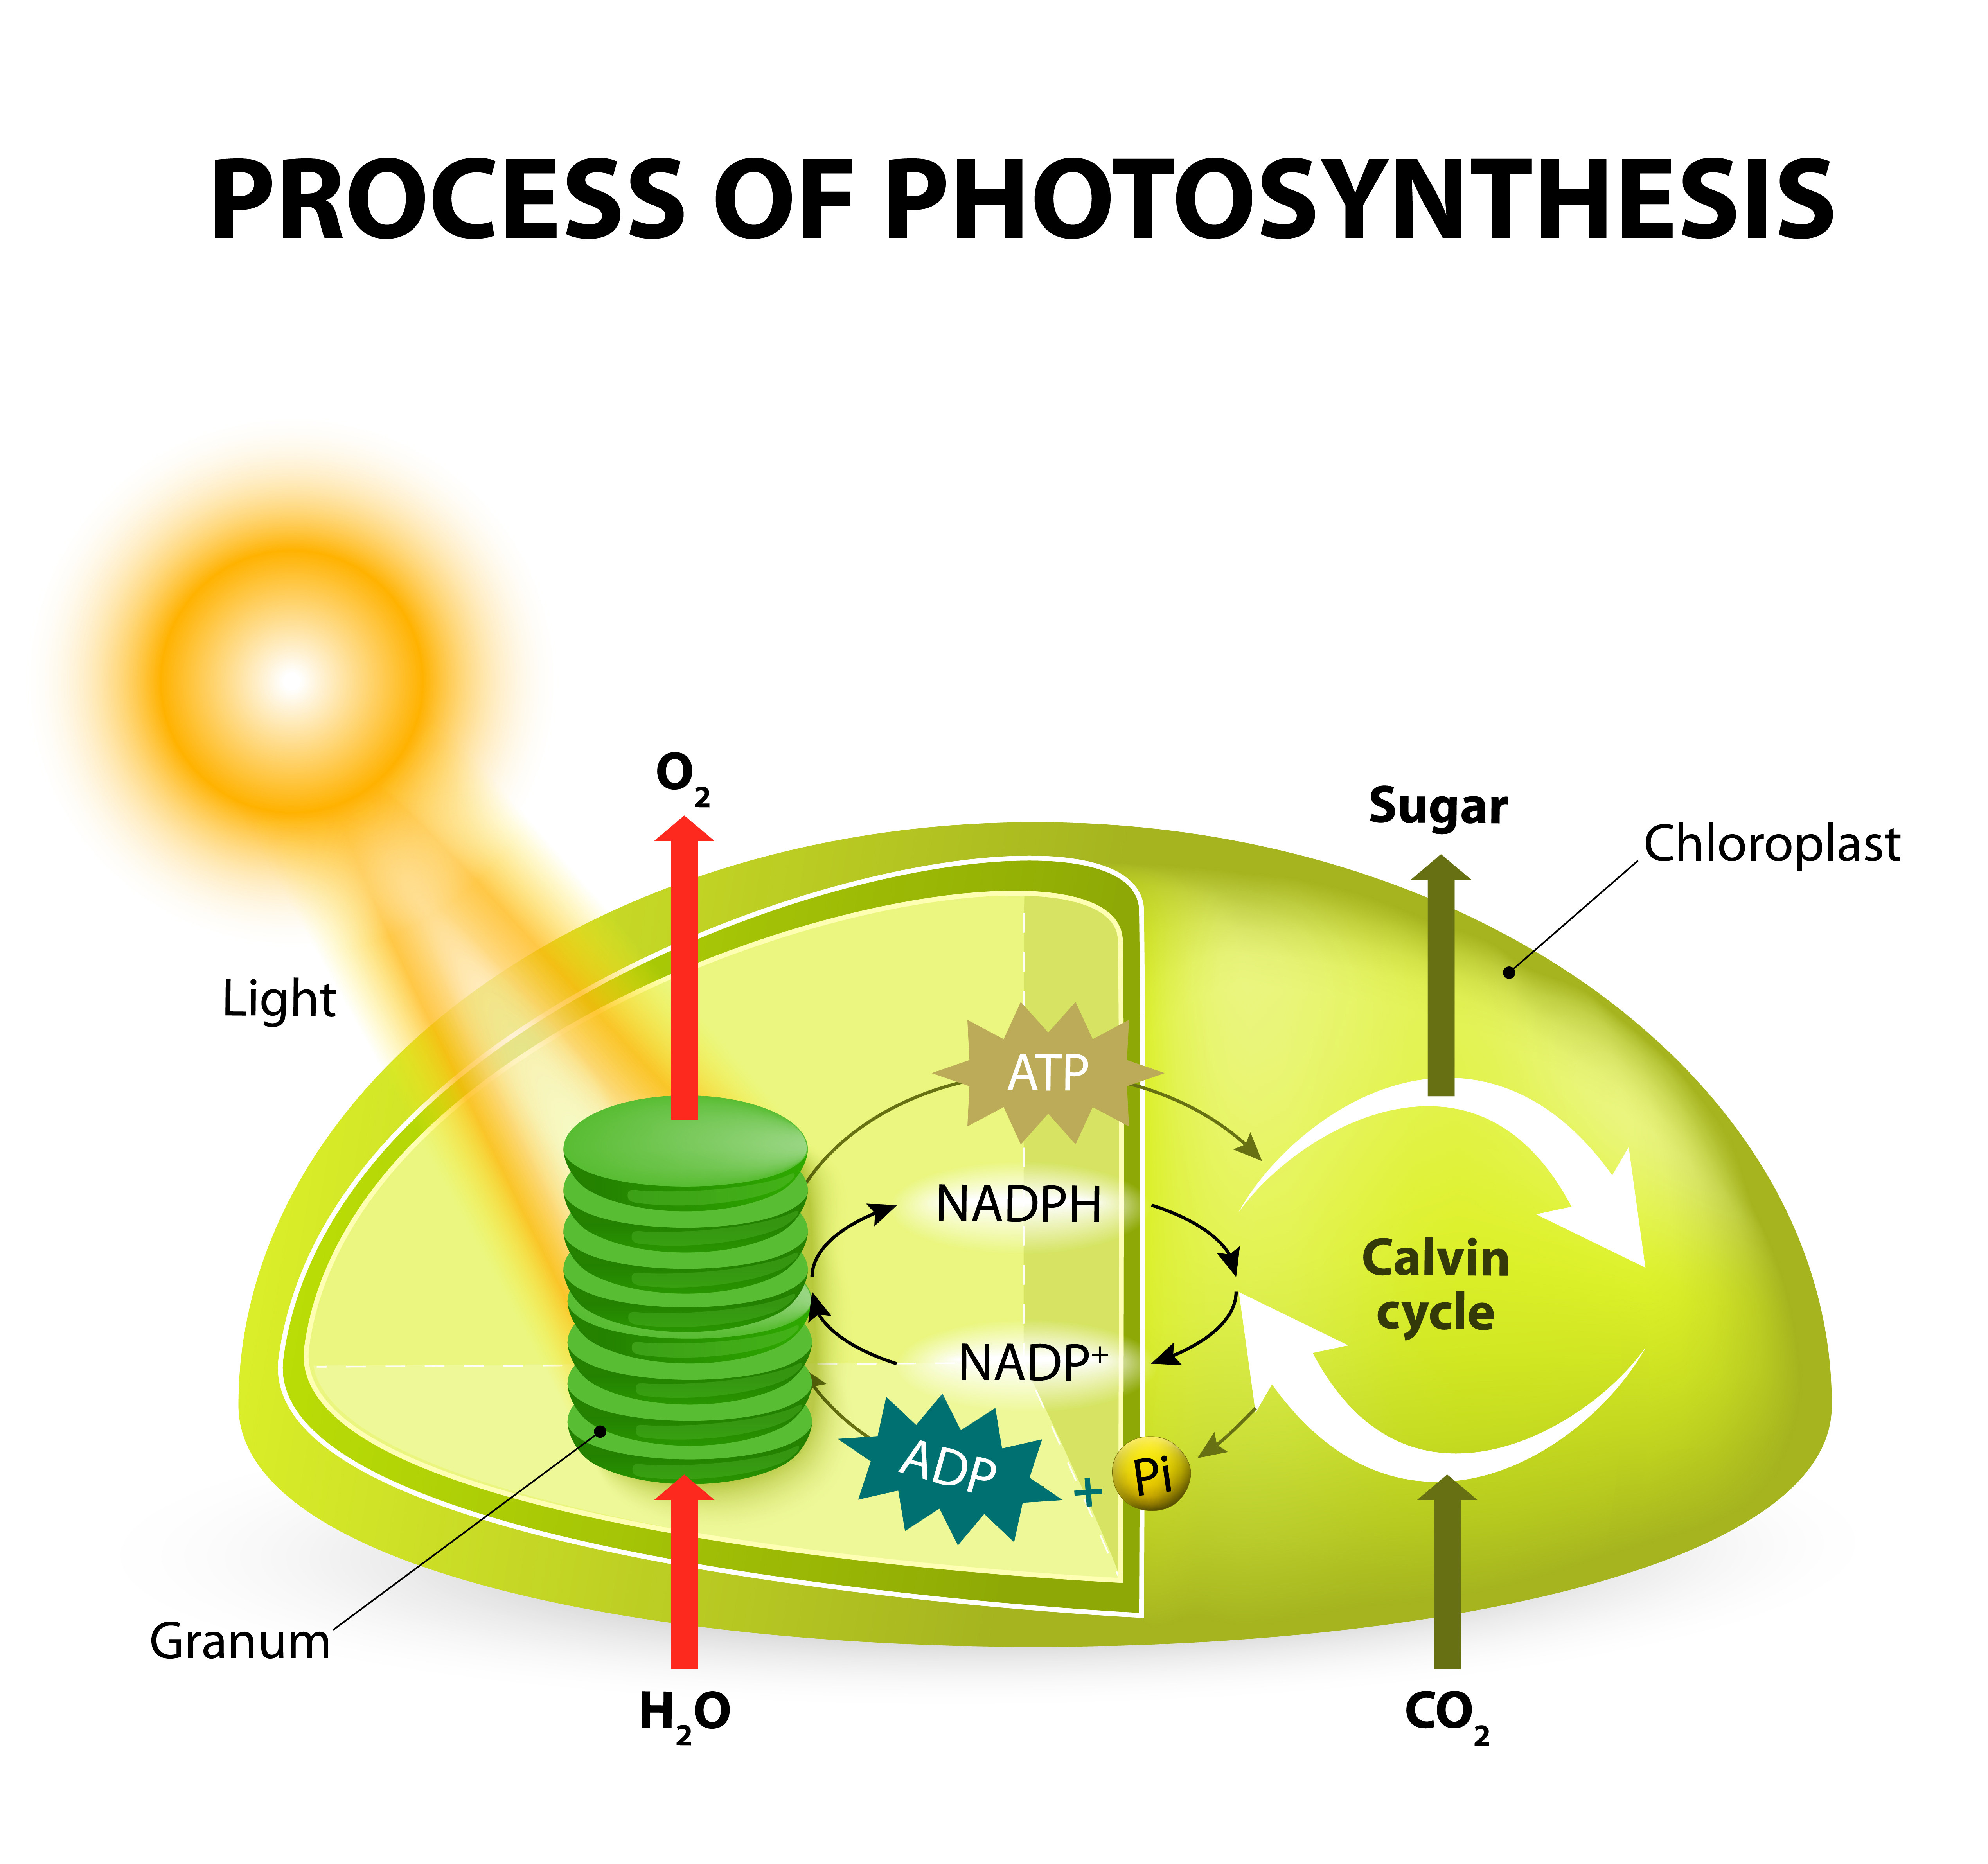 write 3 events of photosynthesis